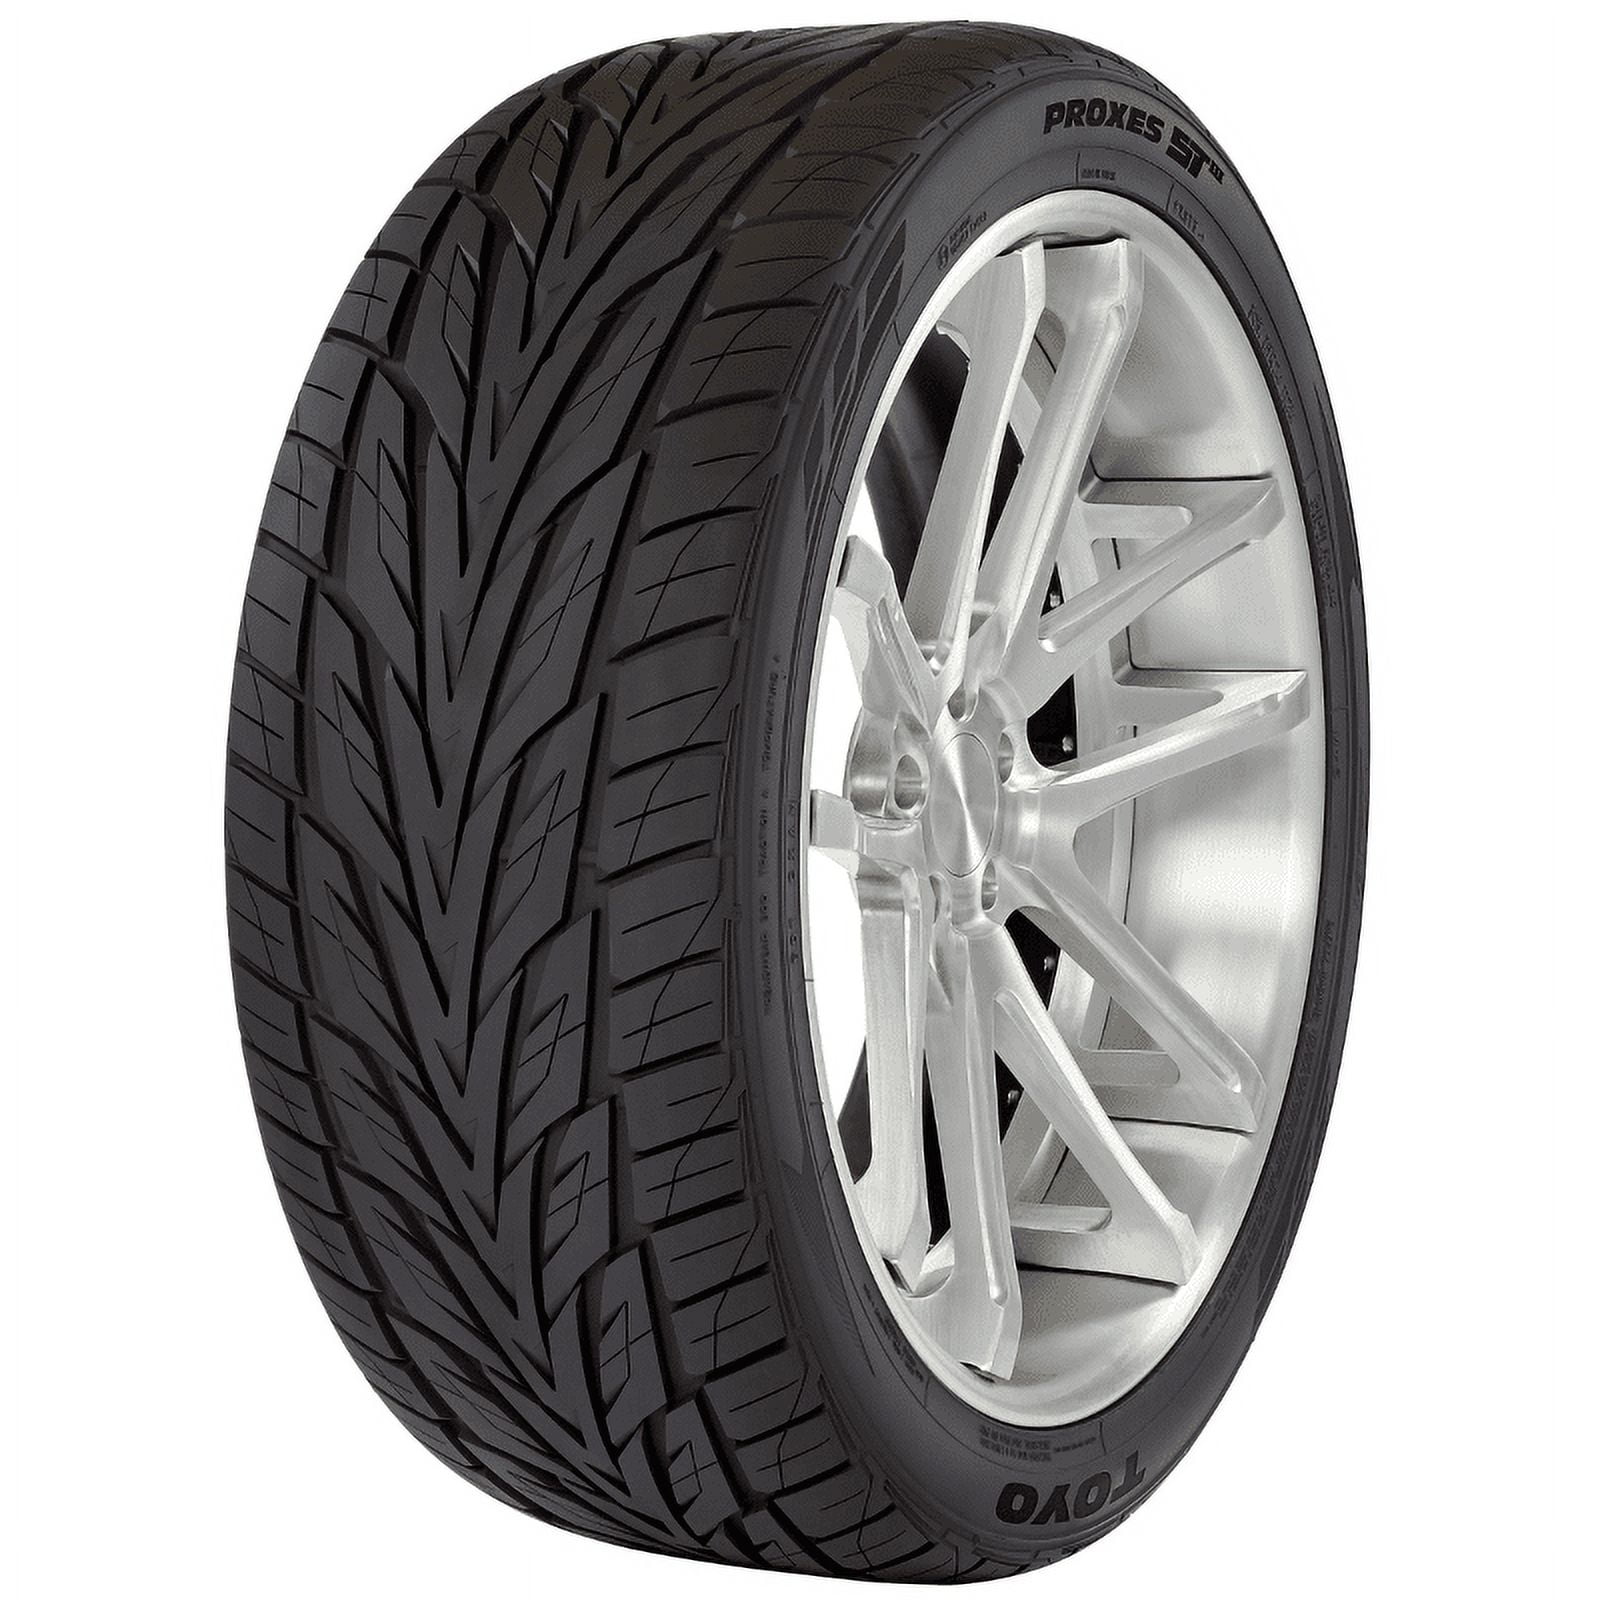 Toyo Tires Proxes ST III 305 45R22 (32.8x11.9R22), 247610